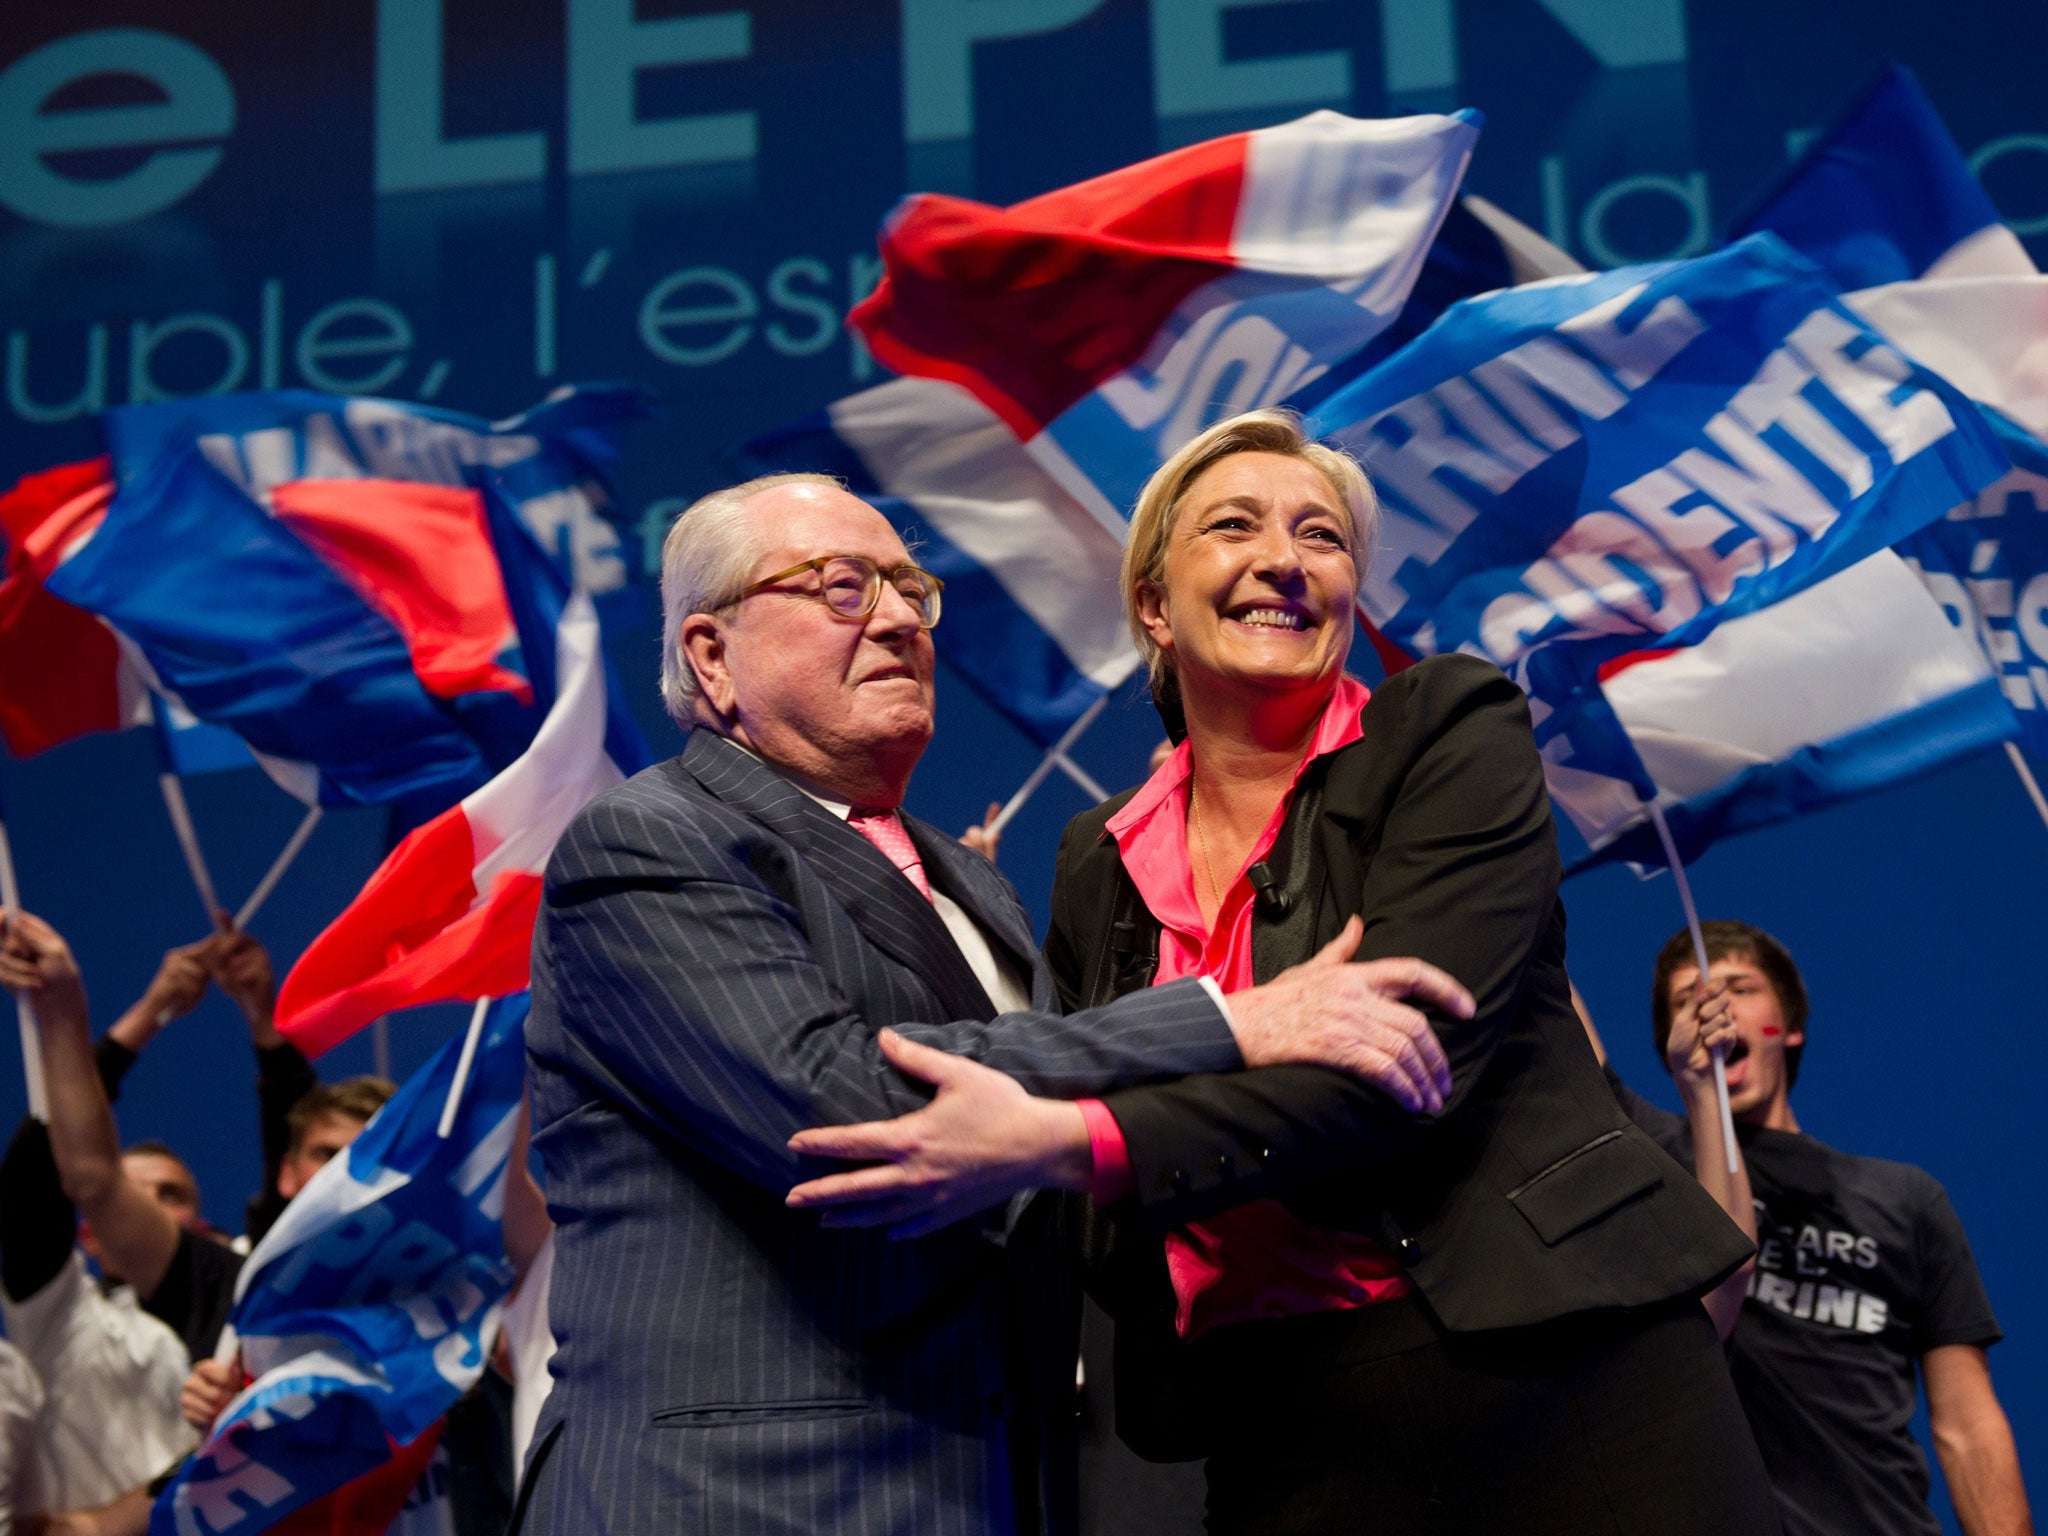 Jean-Marie Le Pen’s latest outburst will undermine his daughter – and successor – Marine’s attempts to forge a European alliance by sanitising the Front National’s image